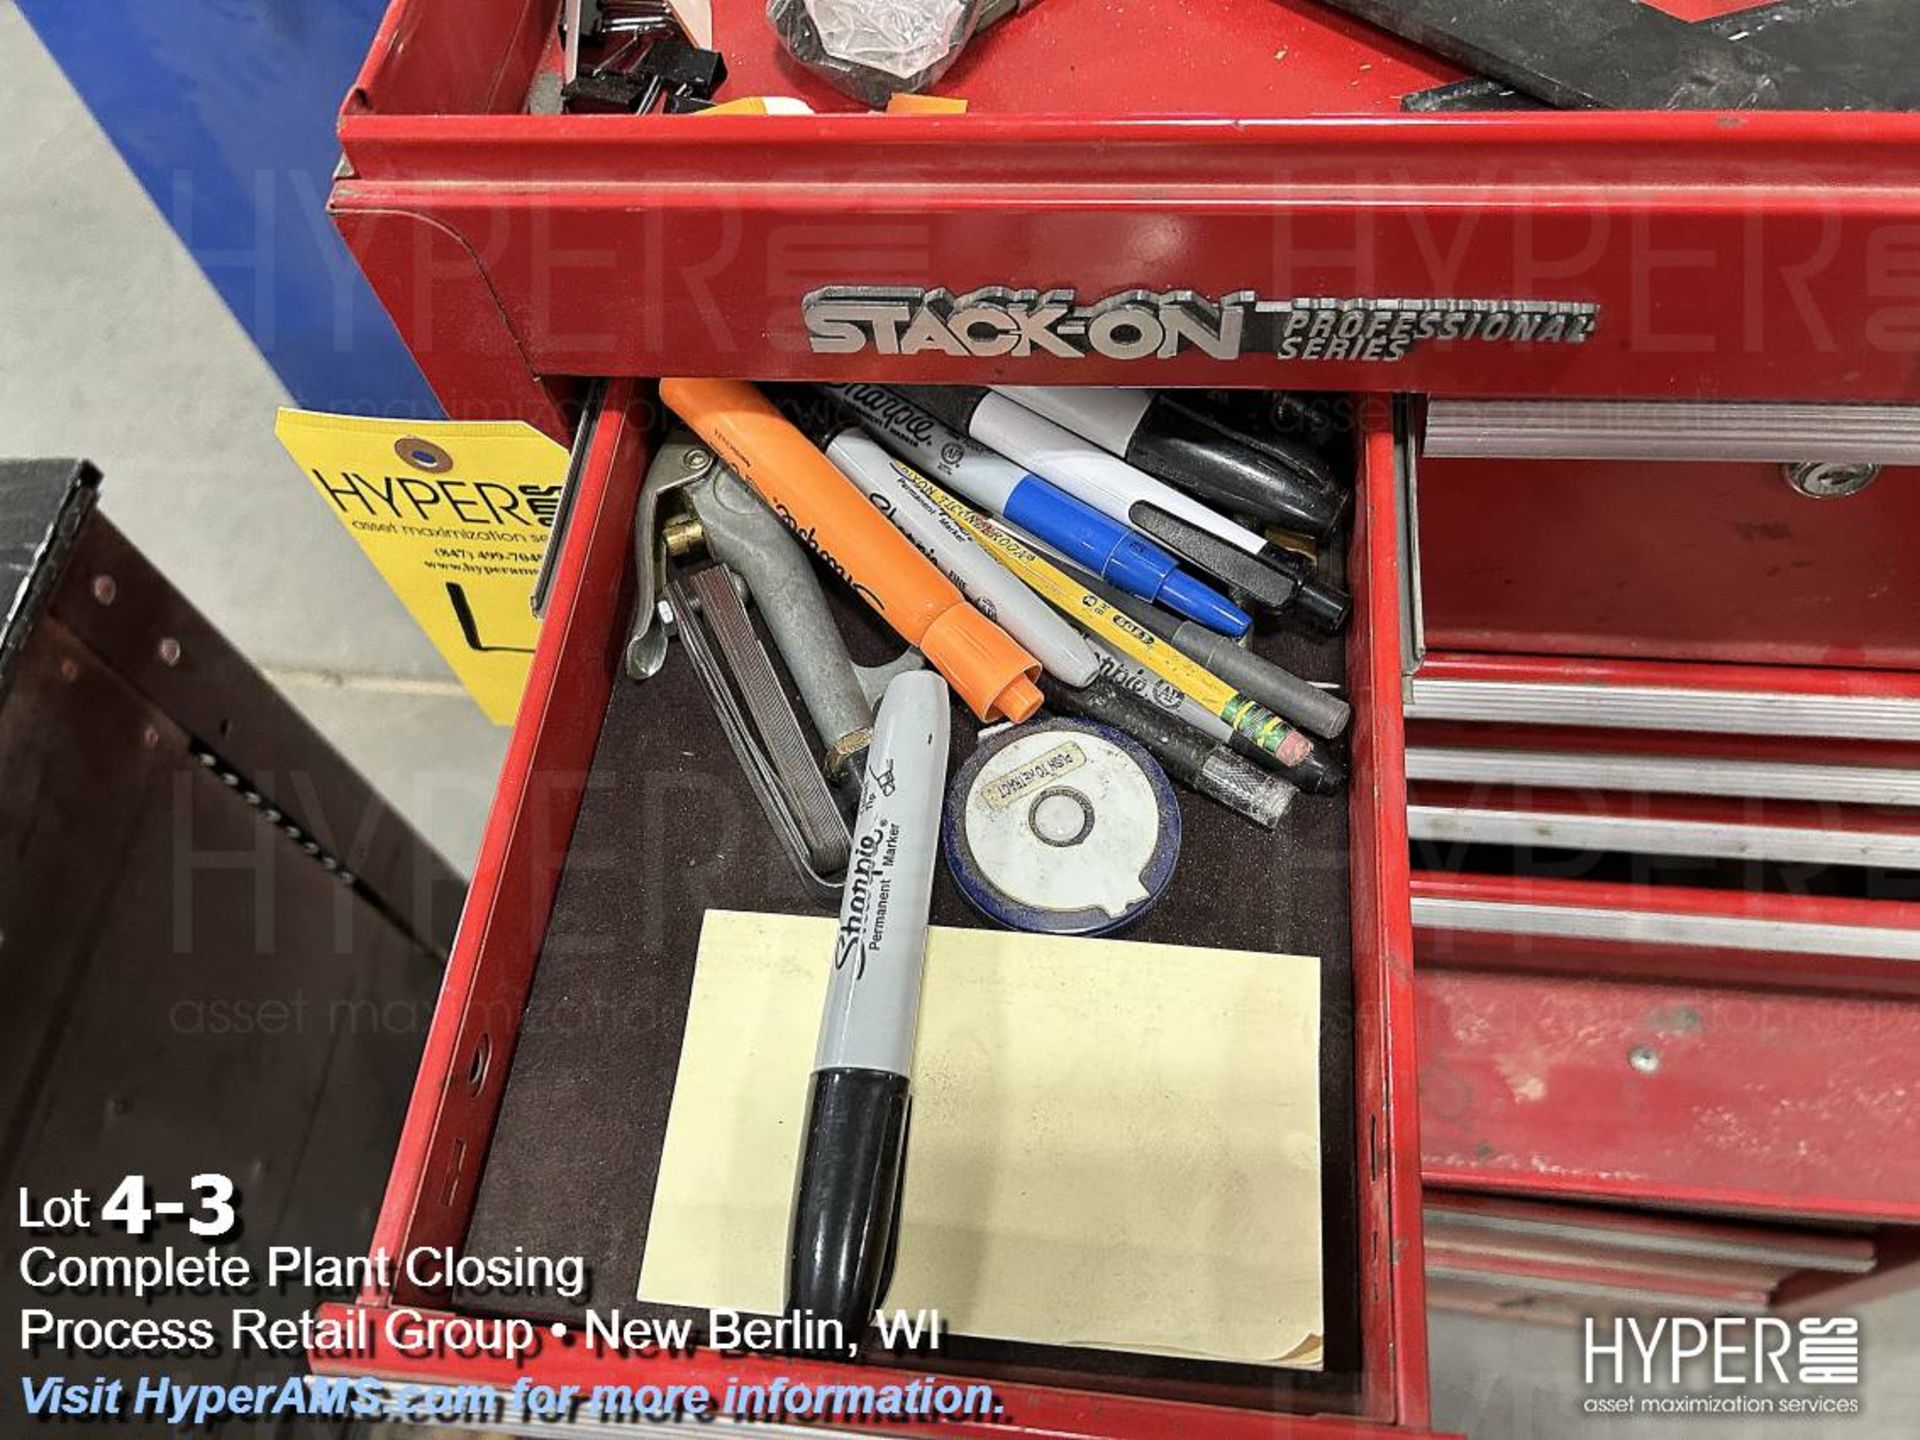 Stack-on roll around toolbox - Image 3 of 12